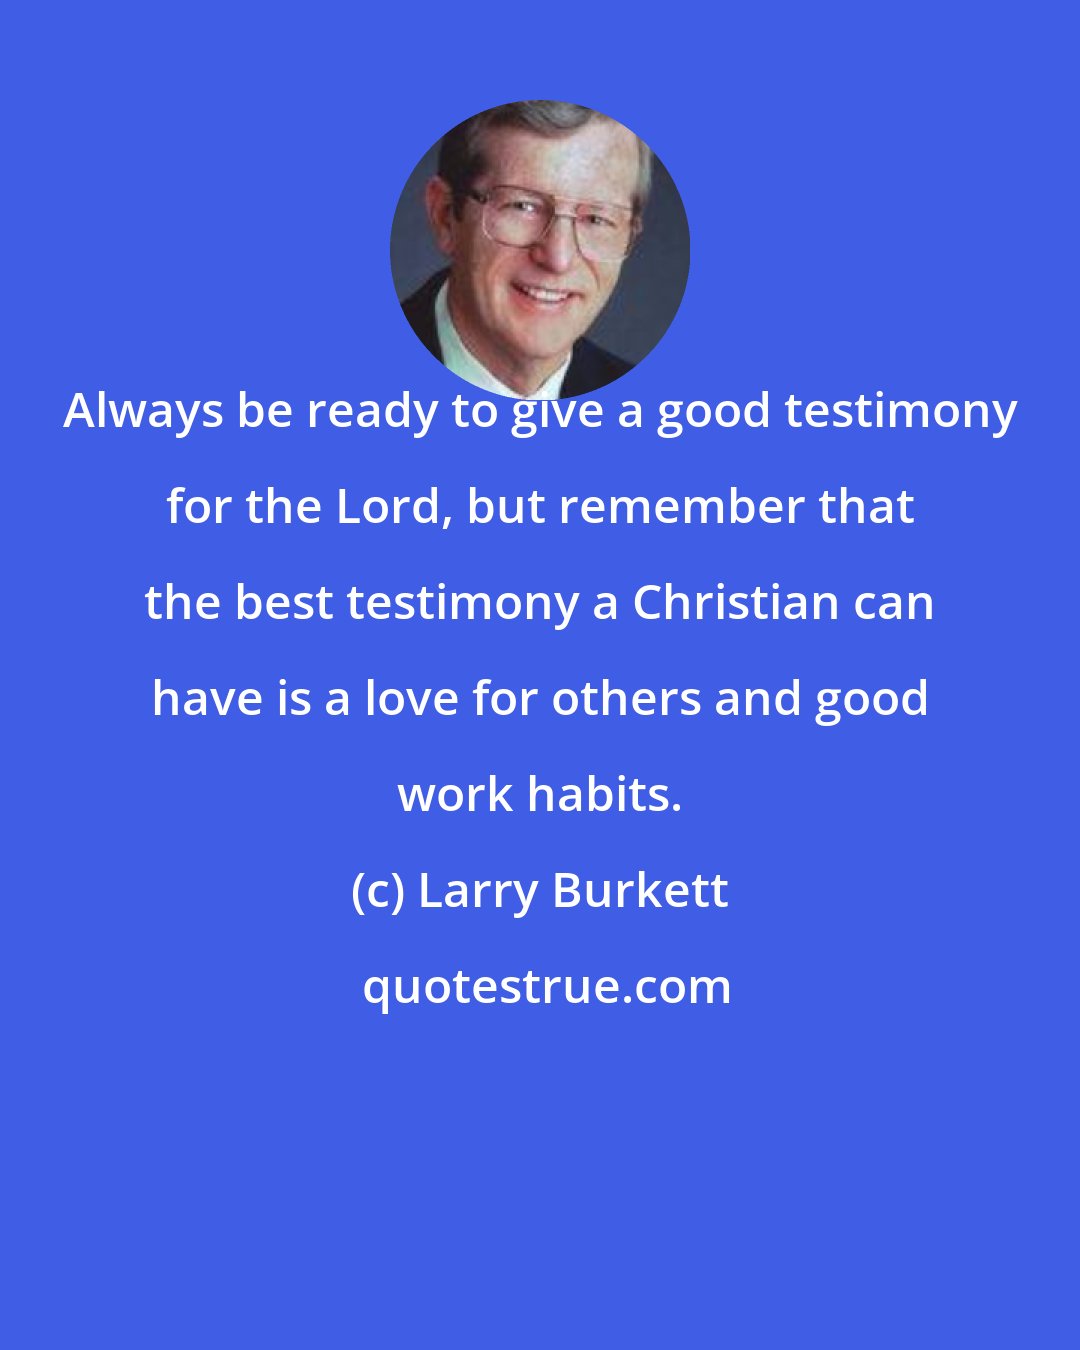 Larry Burkett: Always be ready to give a good testimony for the Lord, but remember that the best testimony a Christian can have is a love for others and good work habits.